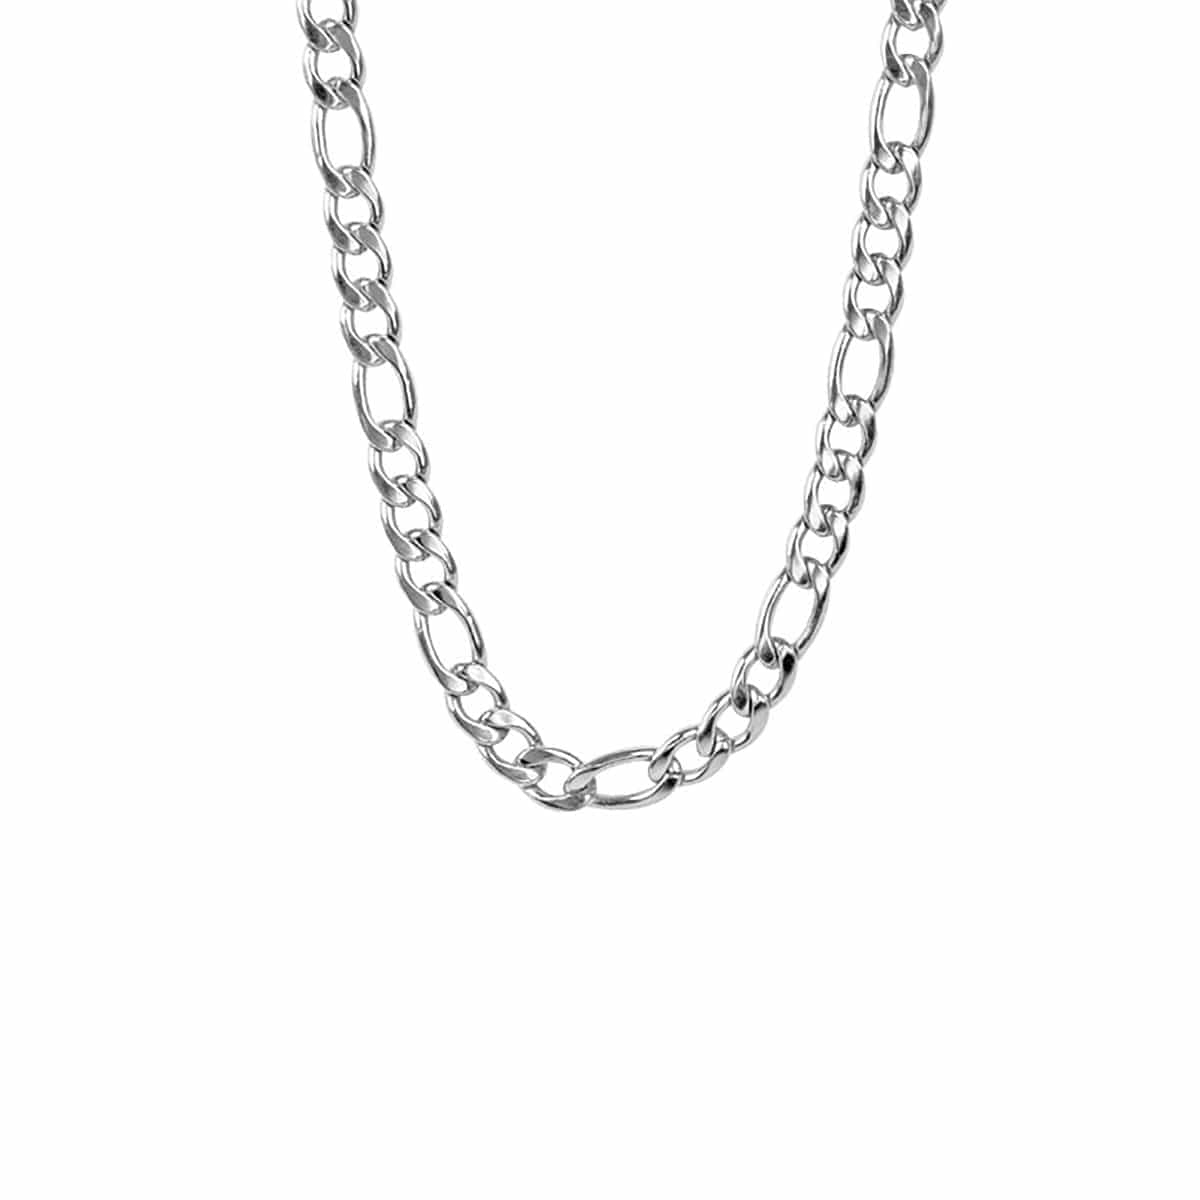 INOX JEWELRY Chains Silver Tone Stainless Steel Polished 9mm Classic Figaro Chain